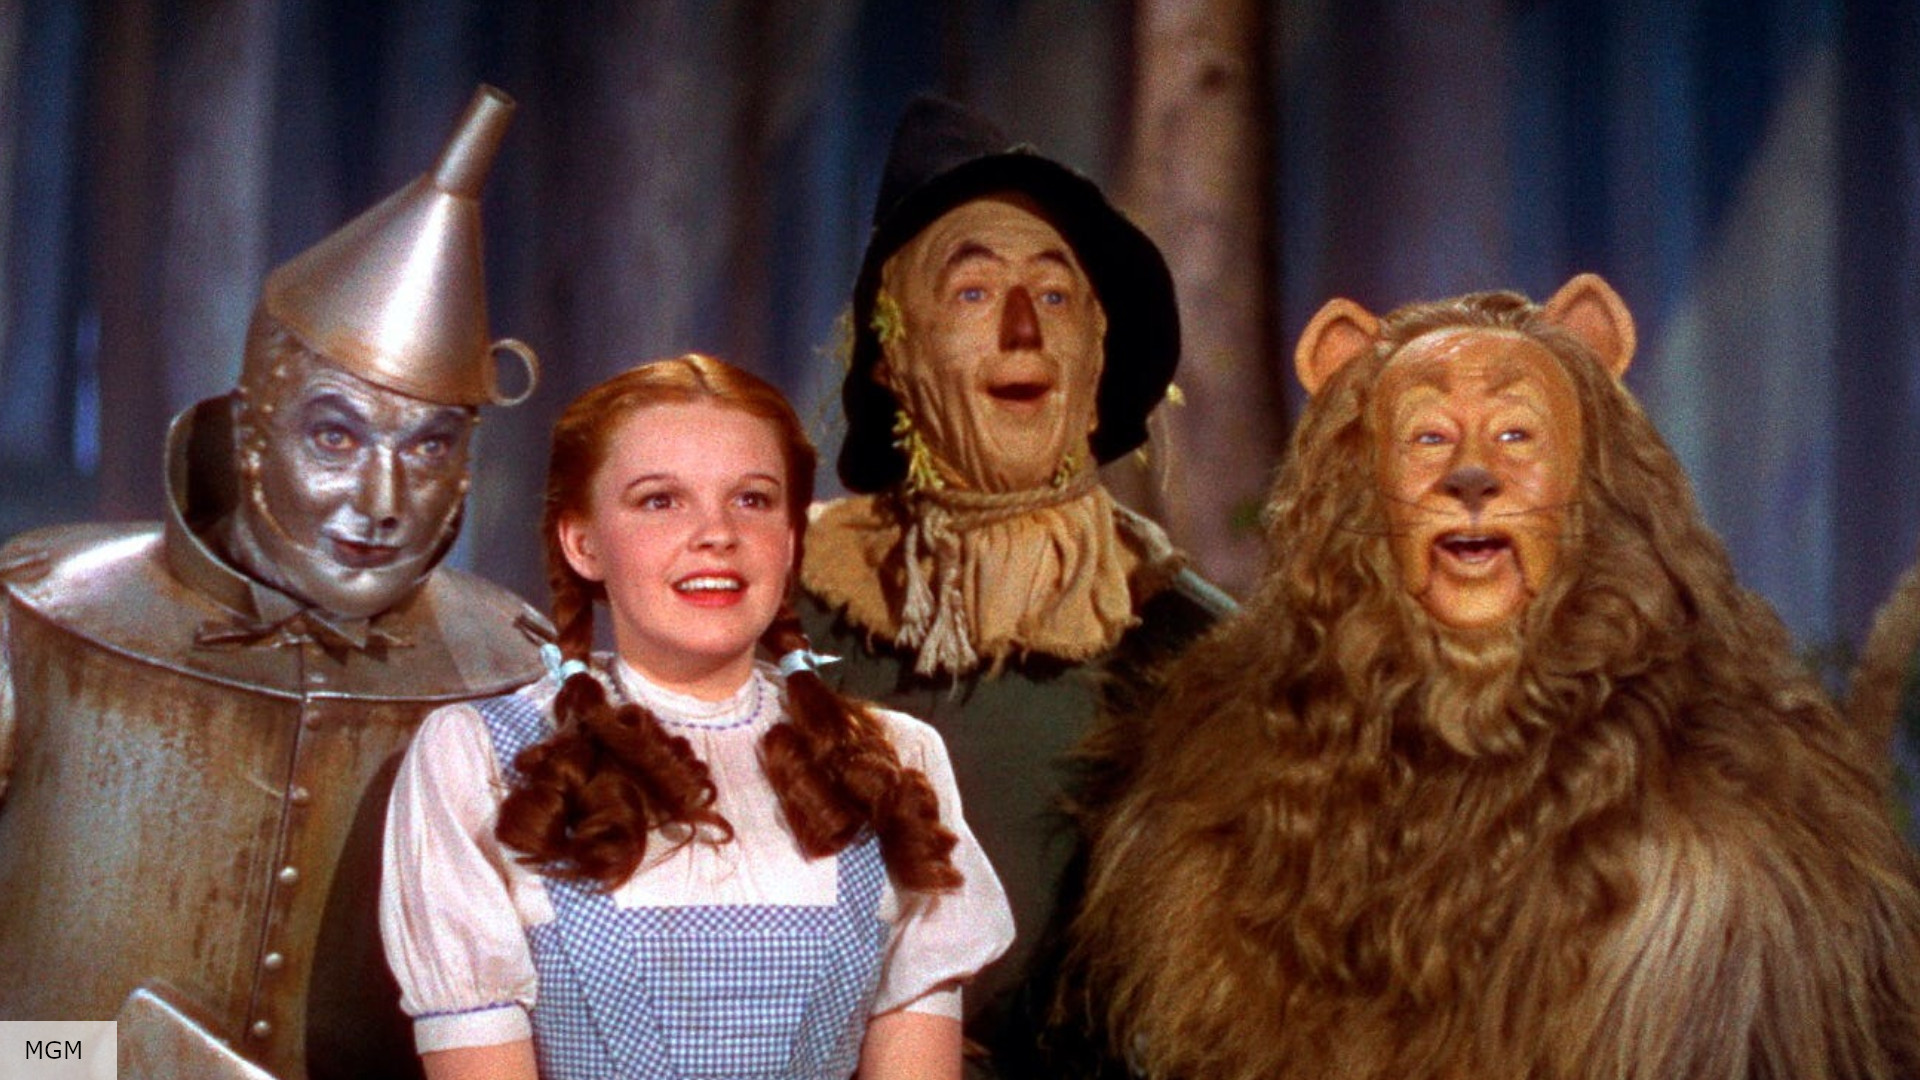 Cast of Wizard of Oz